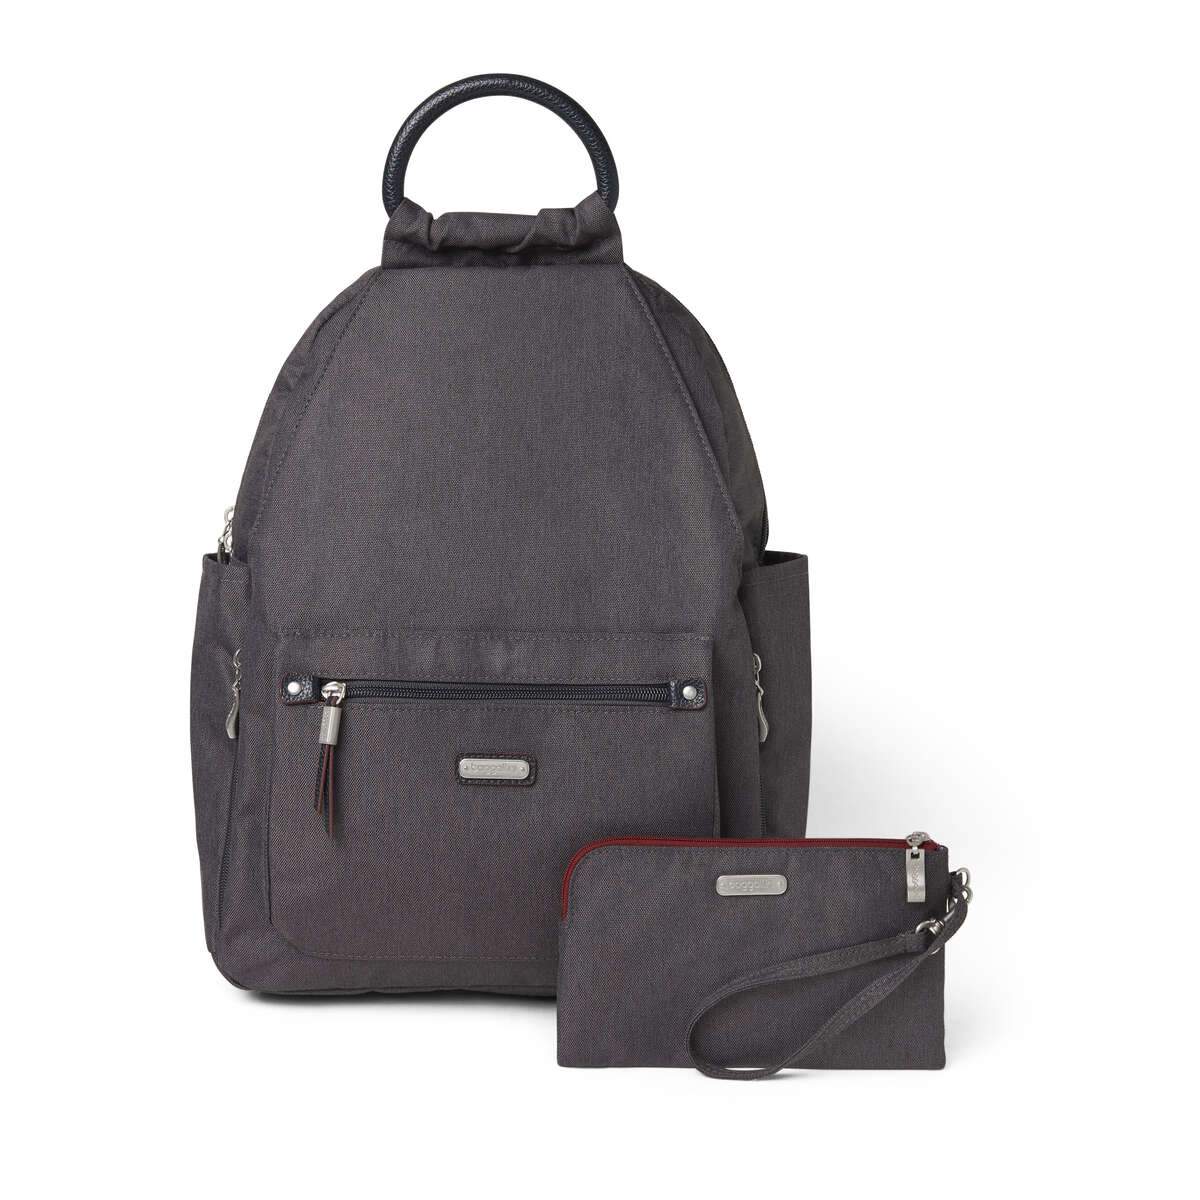 Baggallini All Day Backpack With RFID Phone Wristlet - Charcoal